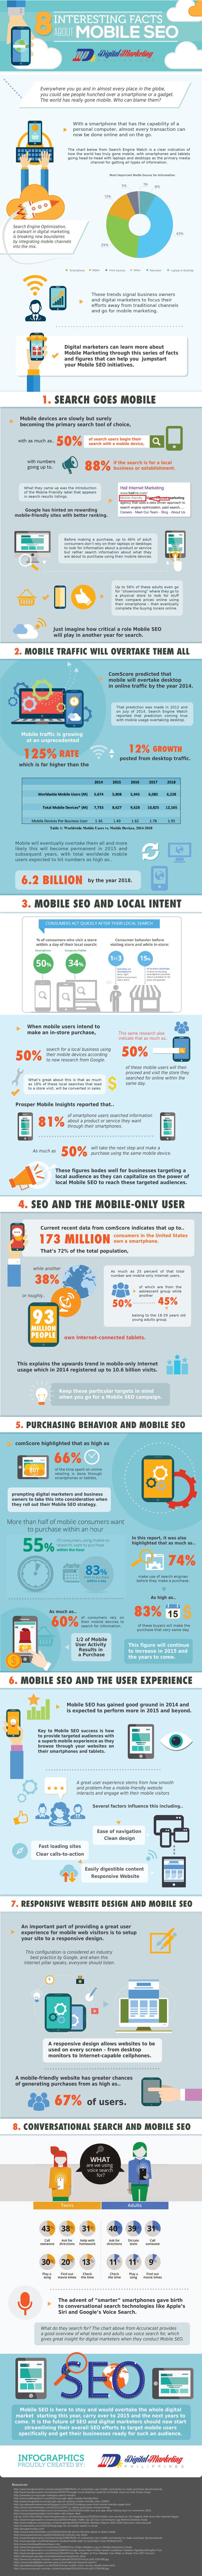 infographie-mobile-friendly-statistiques